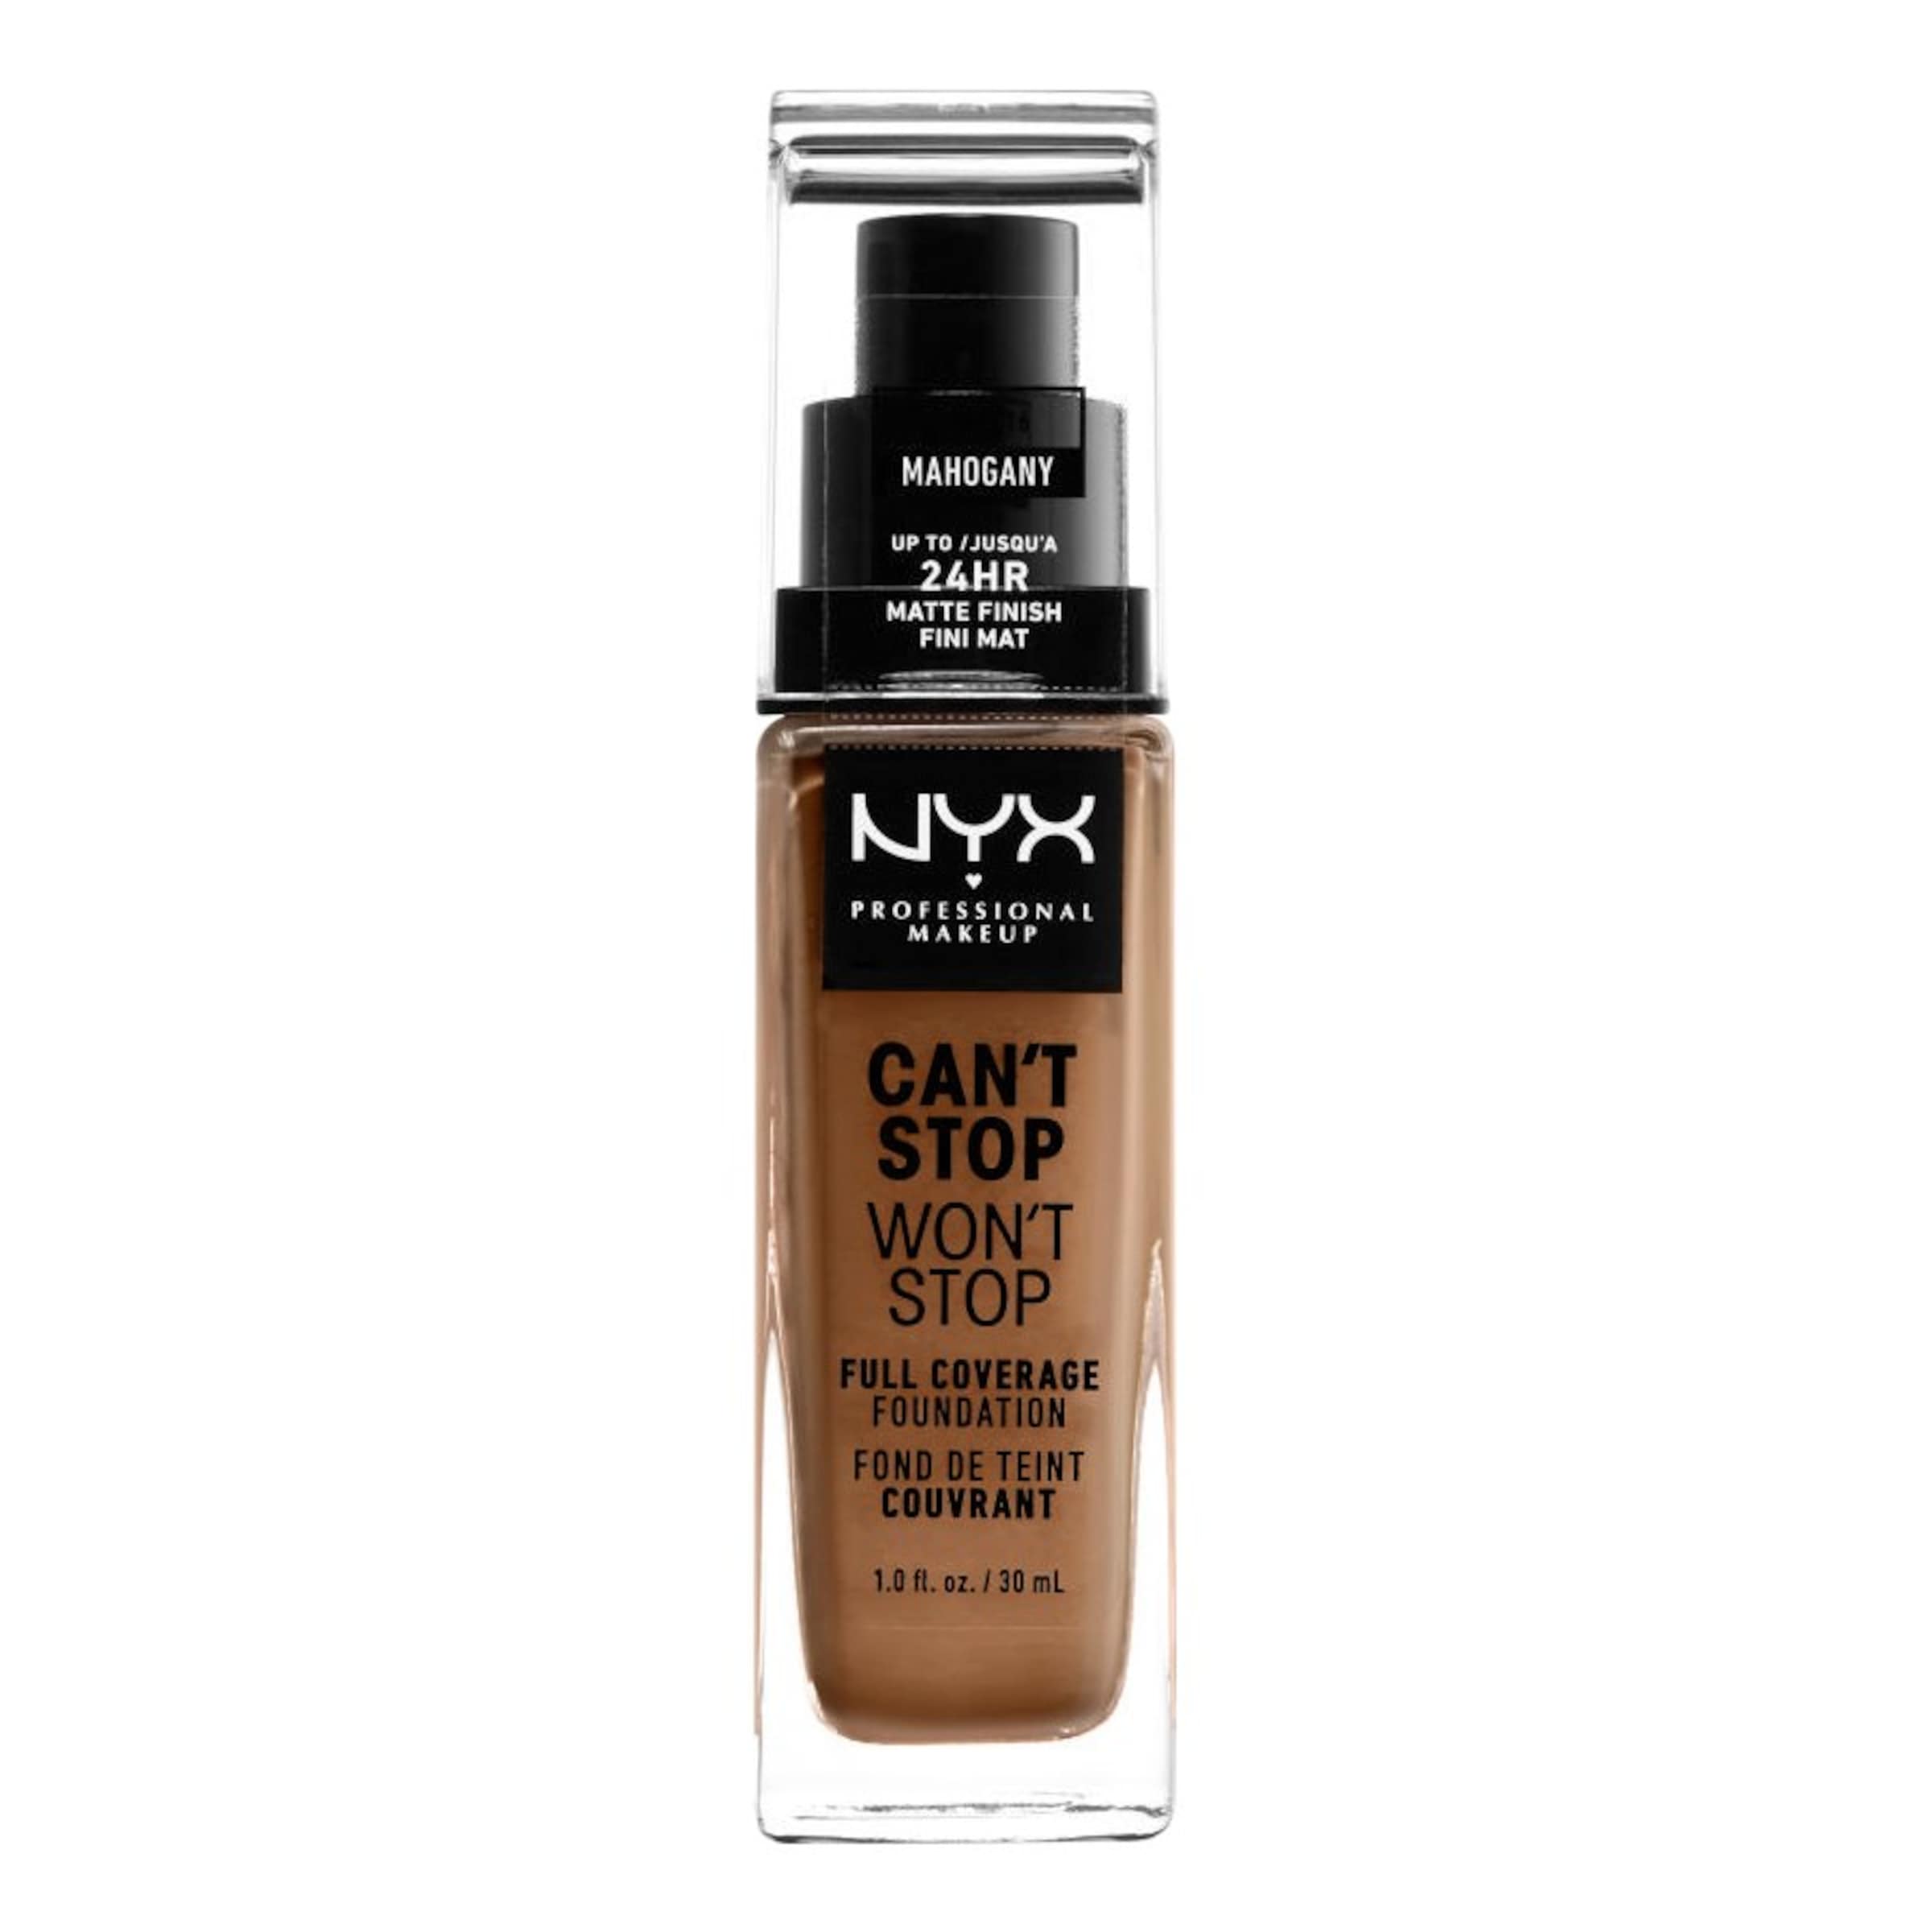 NYX Professional Makeup Foundation Cant Stop Wont Stop in Beige 